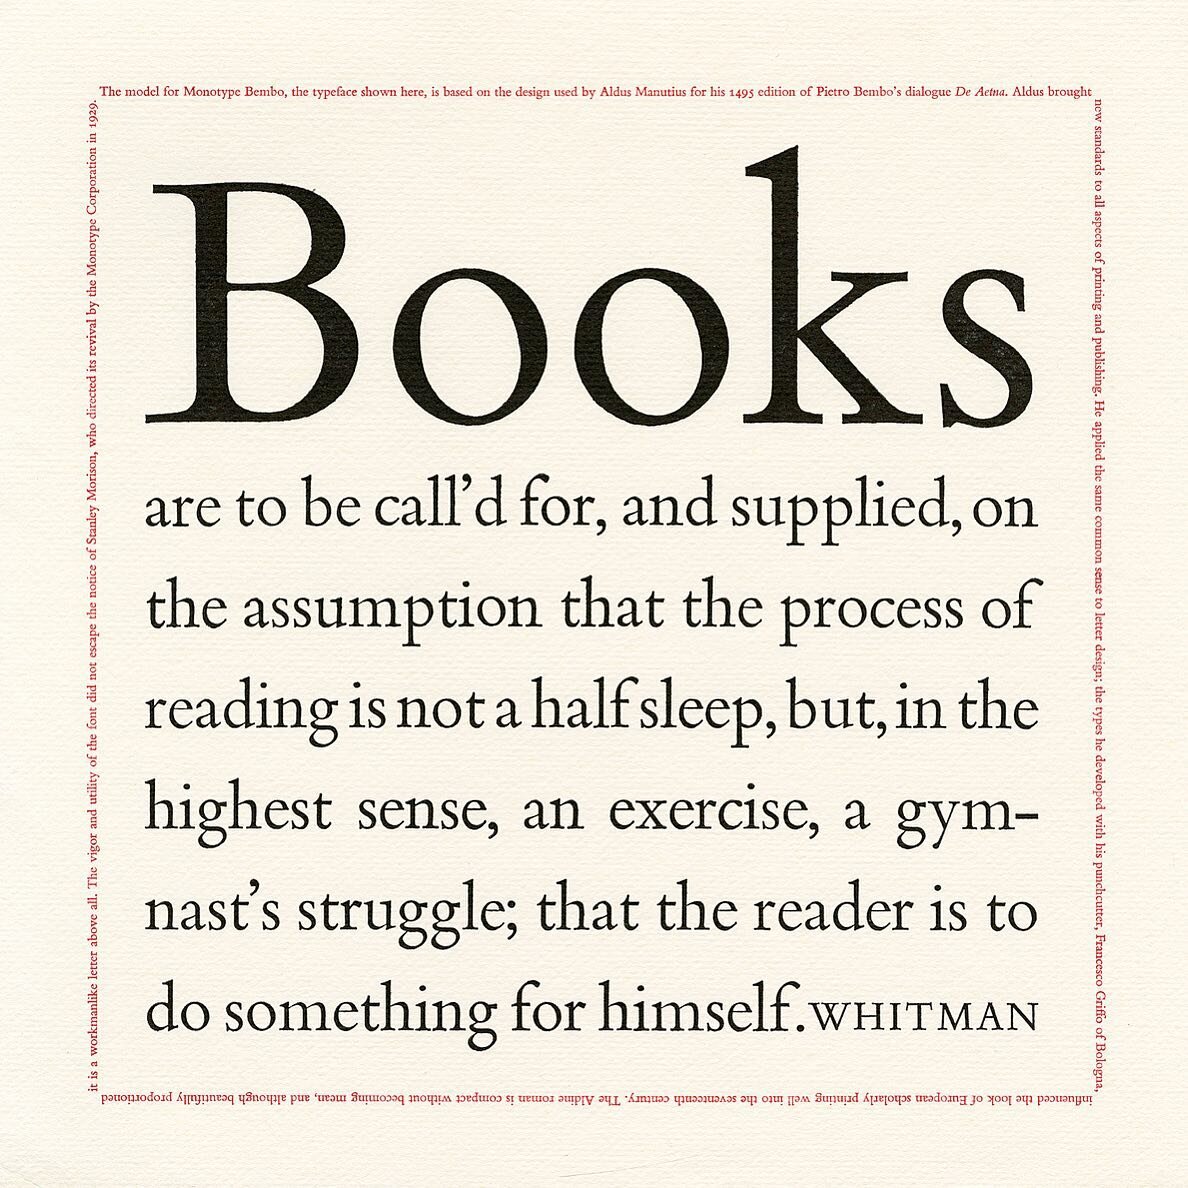 Books are to be call'd for, and supplied, on the assumption that the process of reading is not half asleep, but, in the highest sense, an exercise, a gymnast's struggle; that the reader is to do something for himself. &ndash; Walt Whitman
From Alphab